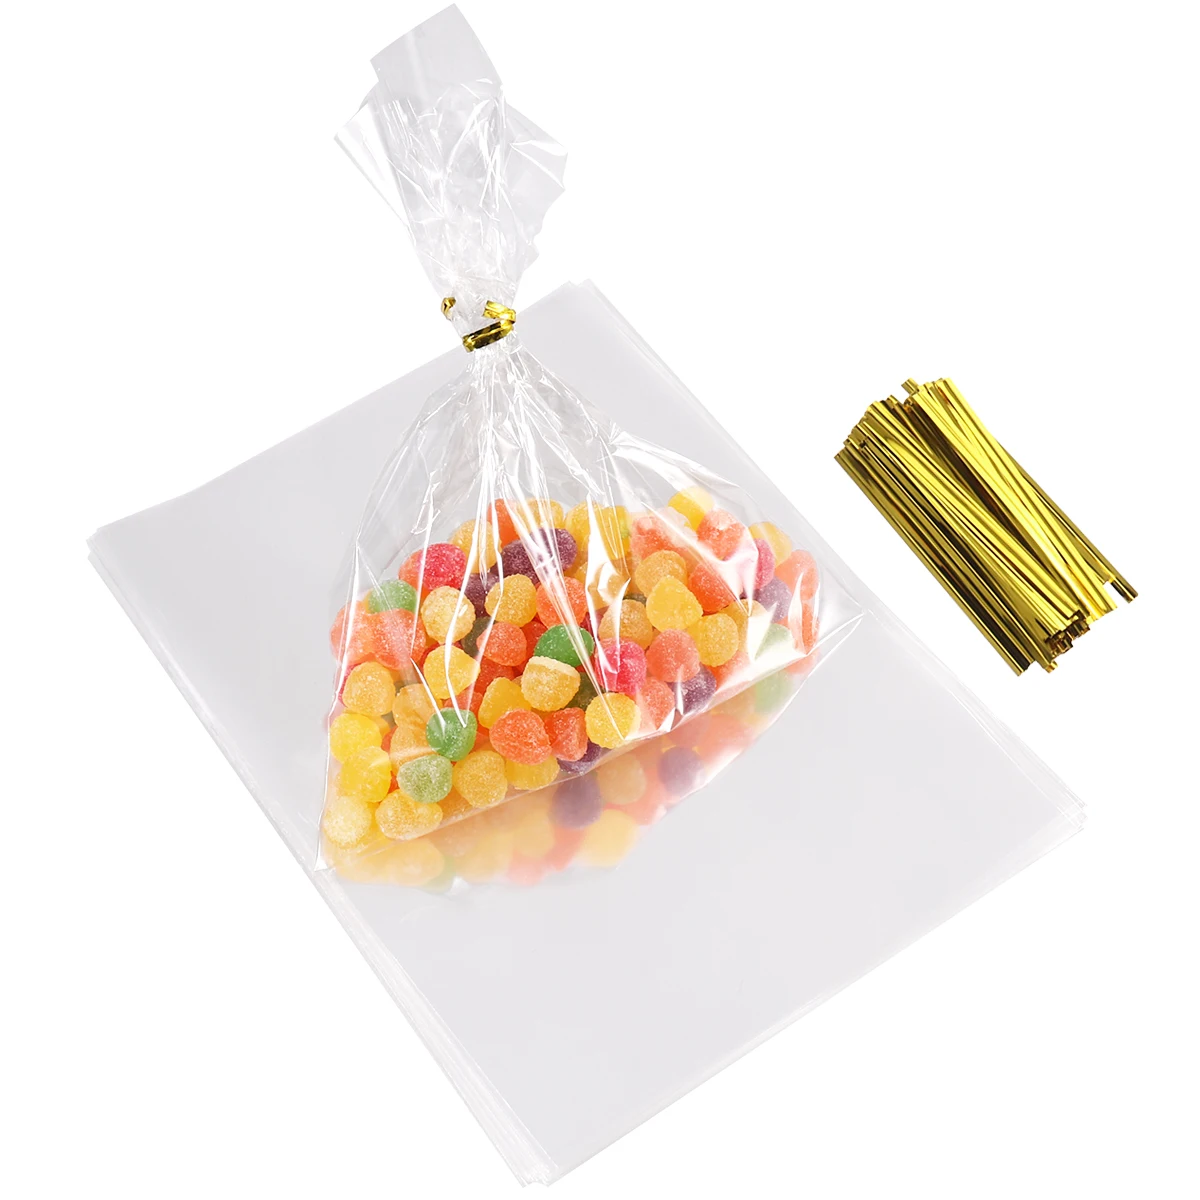 Polypropylene Bags for Candy Bread Chocolate Jelly Cookie Packaging Self Seal OPP Poly Bags 240pcs 2x3 inch Small Clear Resealable Cello Bags Cellophane Bags